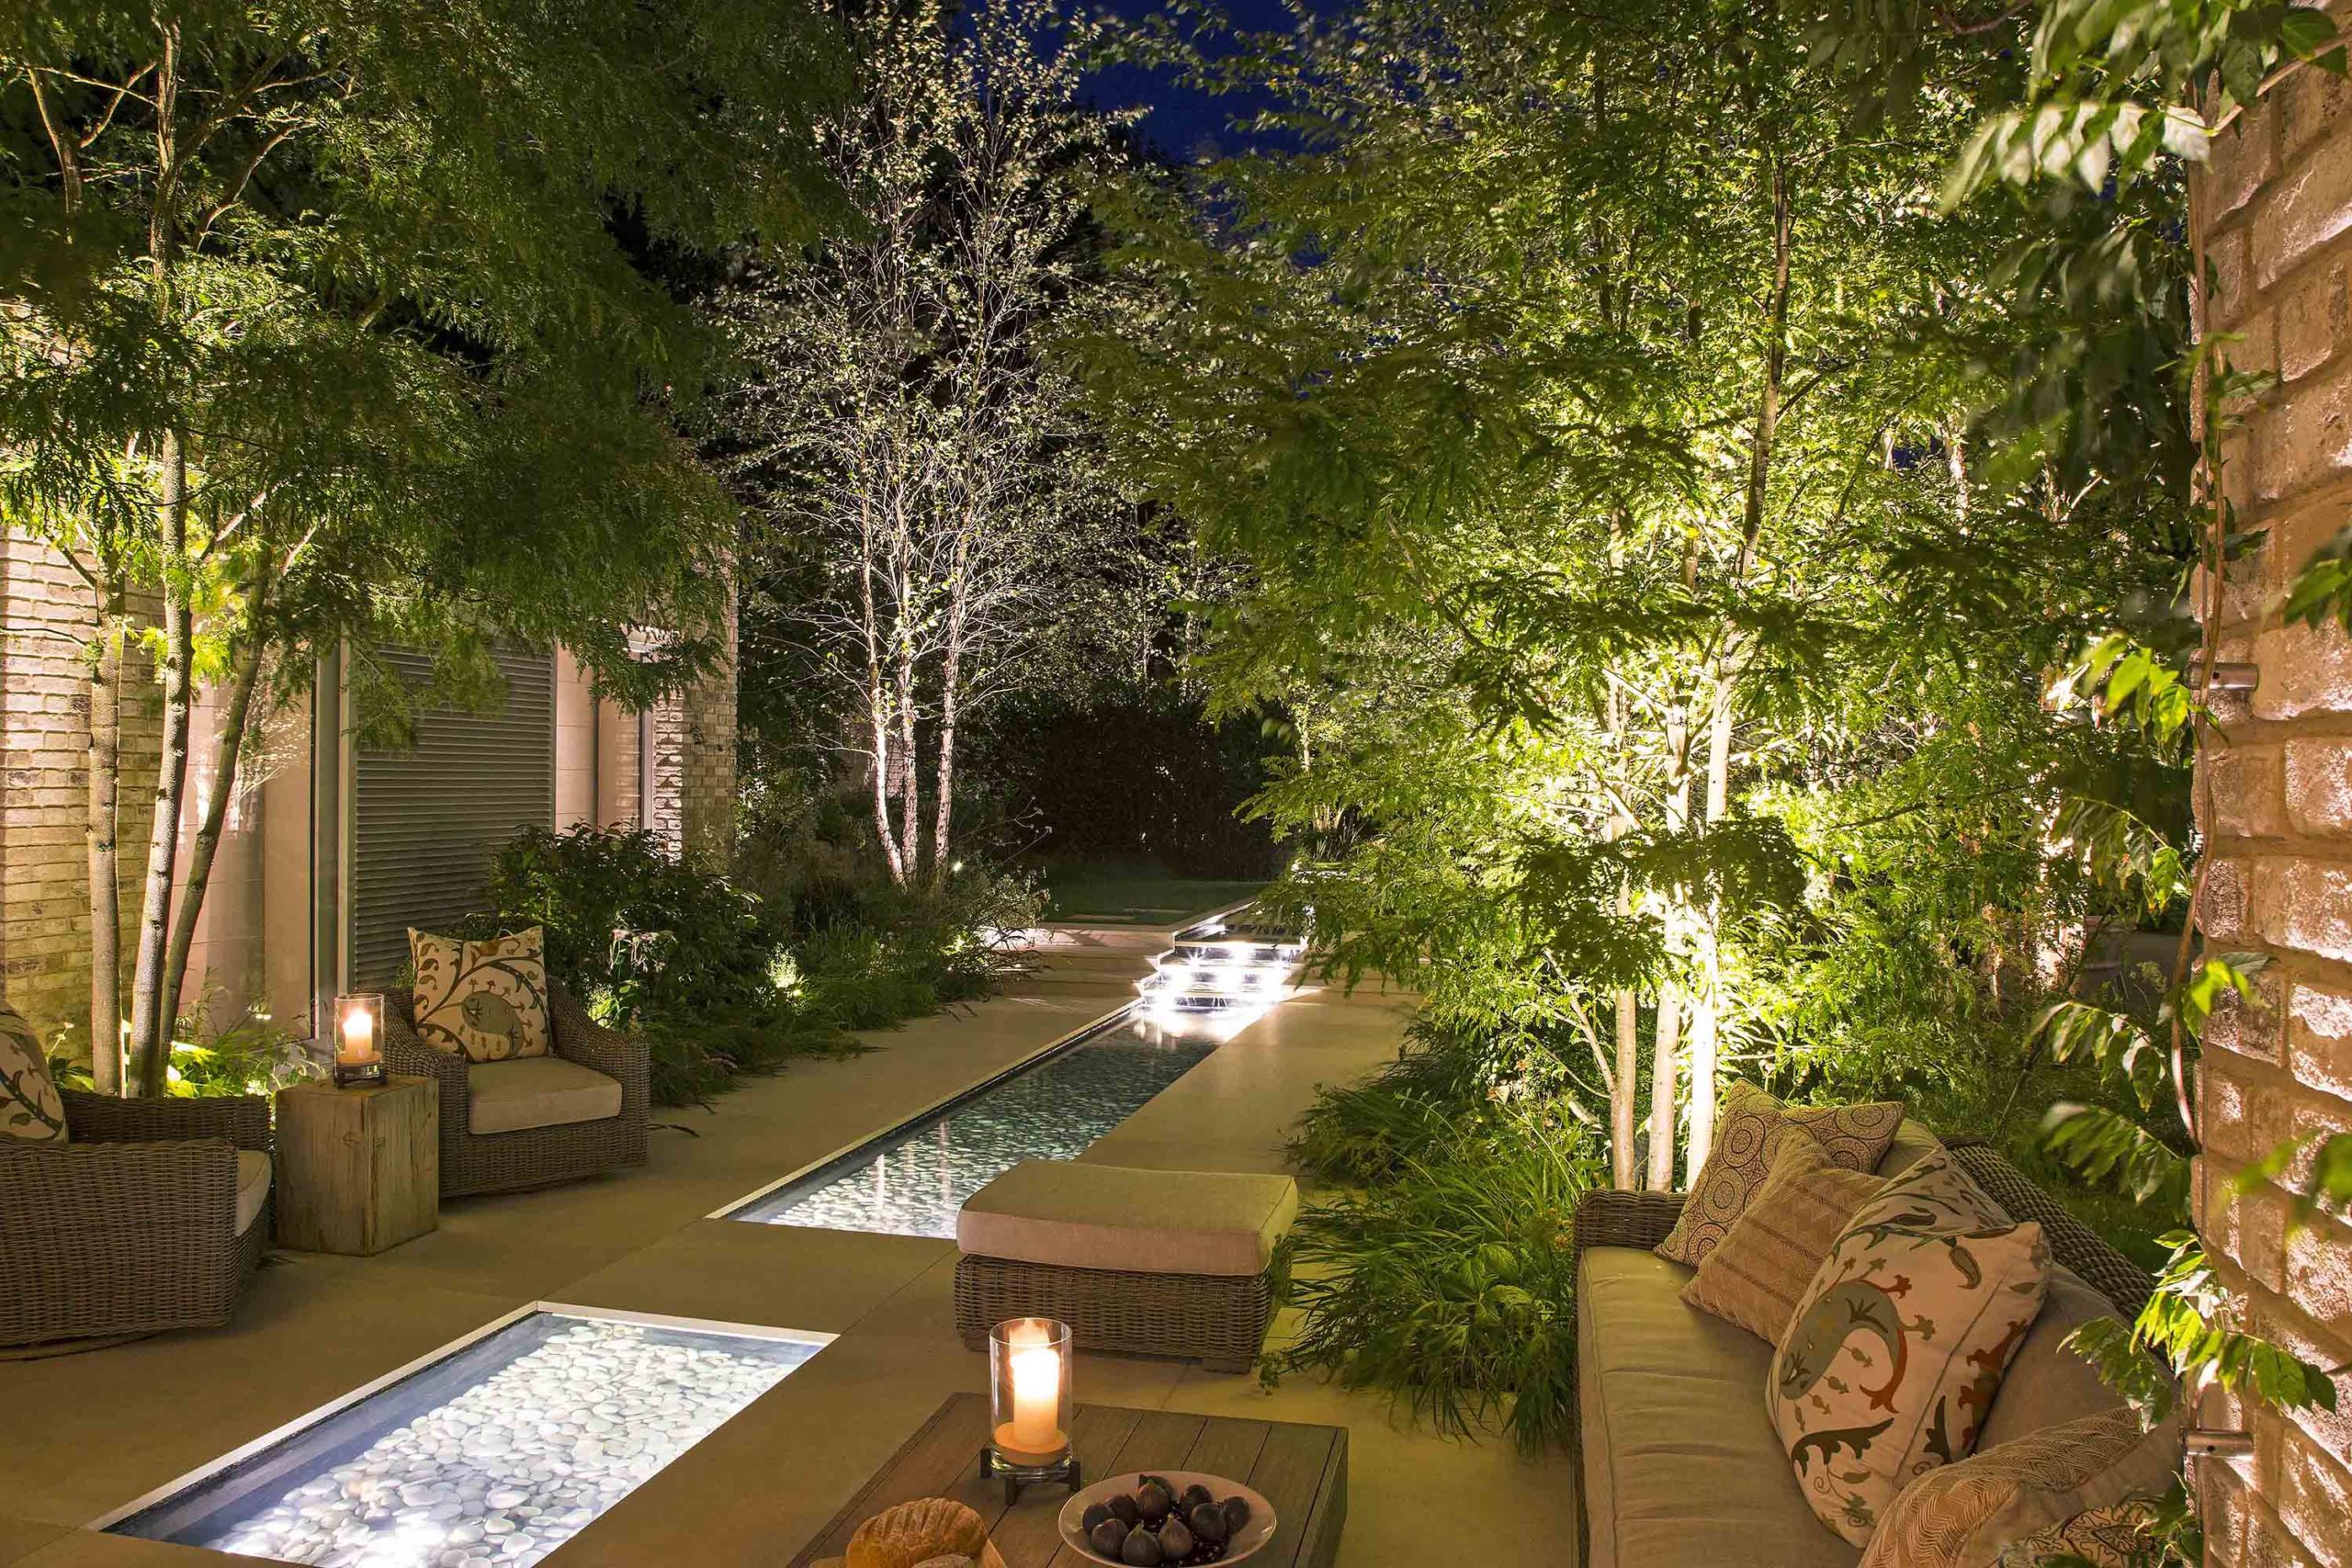 Water features in garden with underwater lights, and planting areas lit with spike lgihts